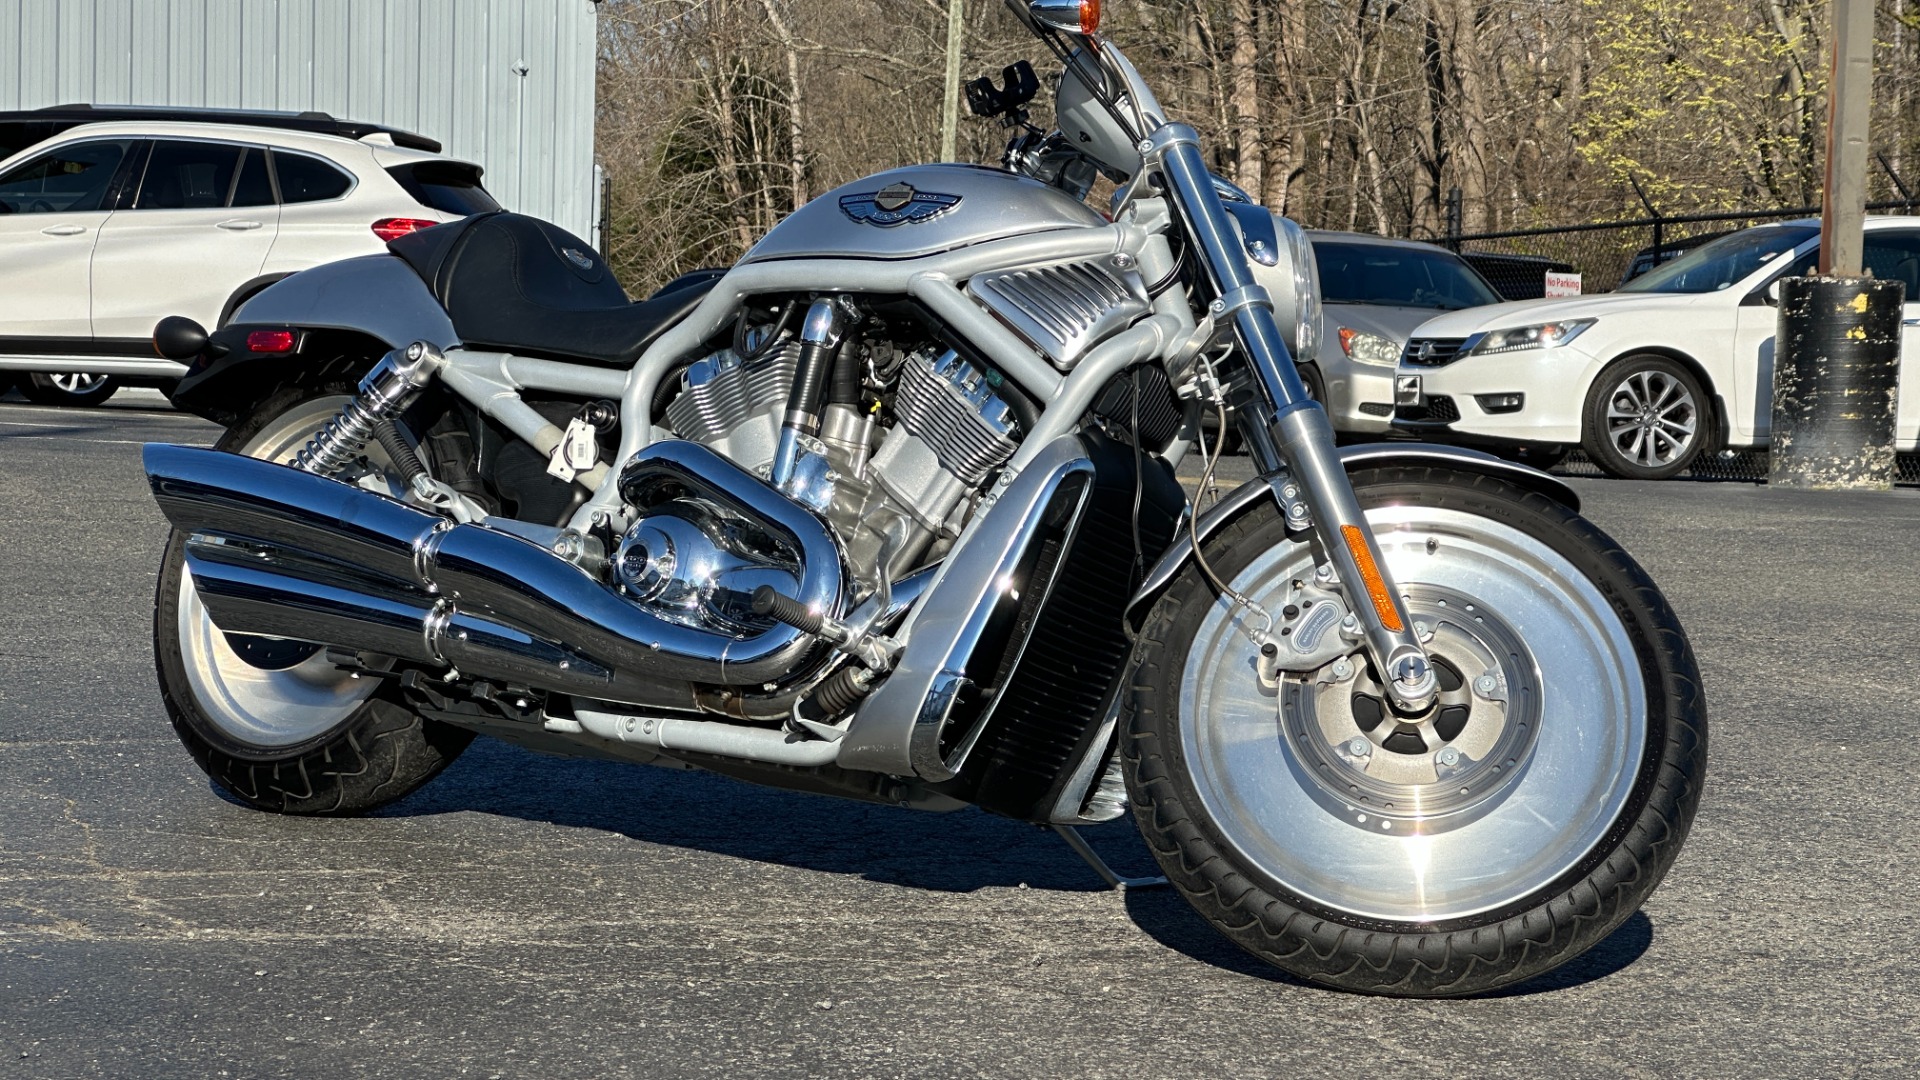 Used 2003 Harley Davidson V Rod ANNIVERSARY EDITION / 1130CC ENGINE / BREMBO BRAKES / VORTEX AIR SCOOPS for sale $9,995 at Formula Imports in Charlotte NC 28227 60